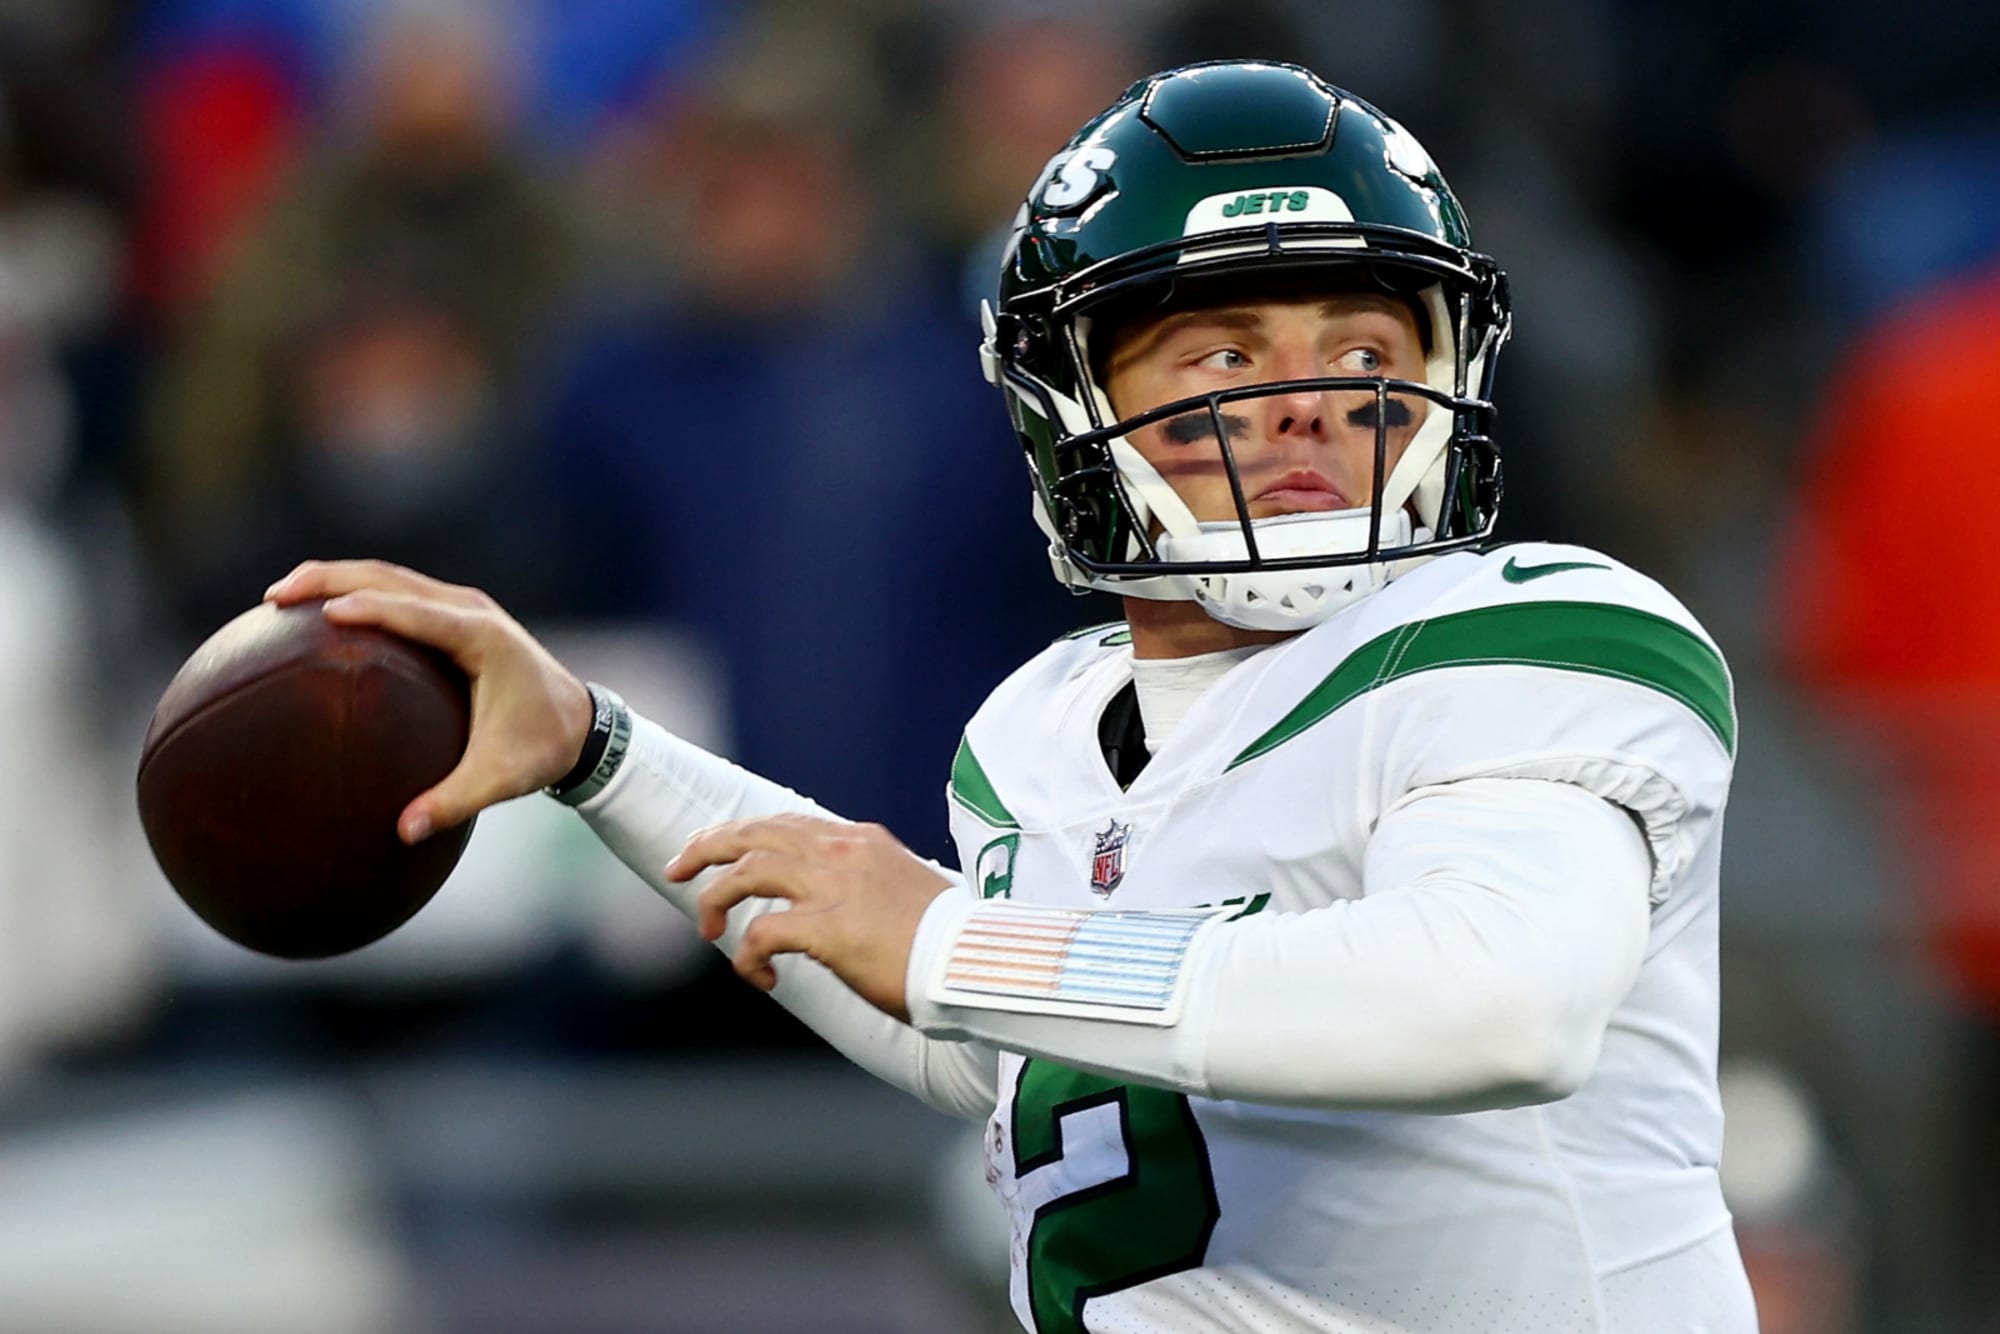 Zach Wilson is officially out as the New York Jets starter